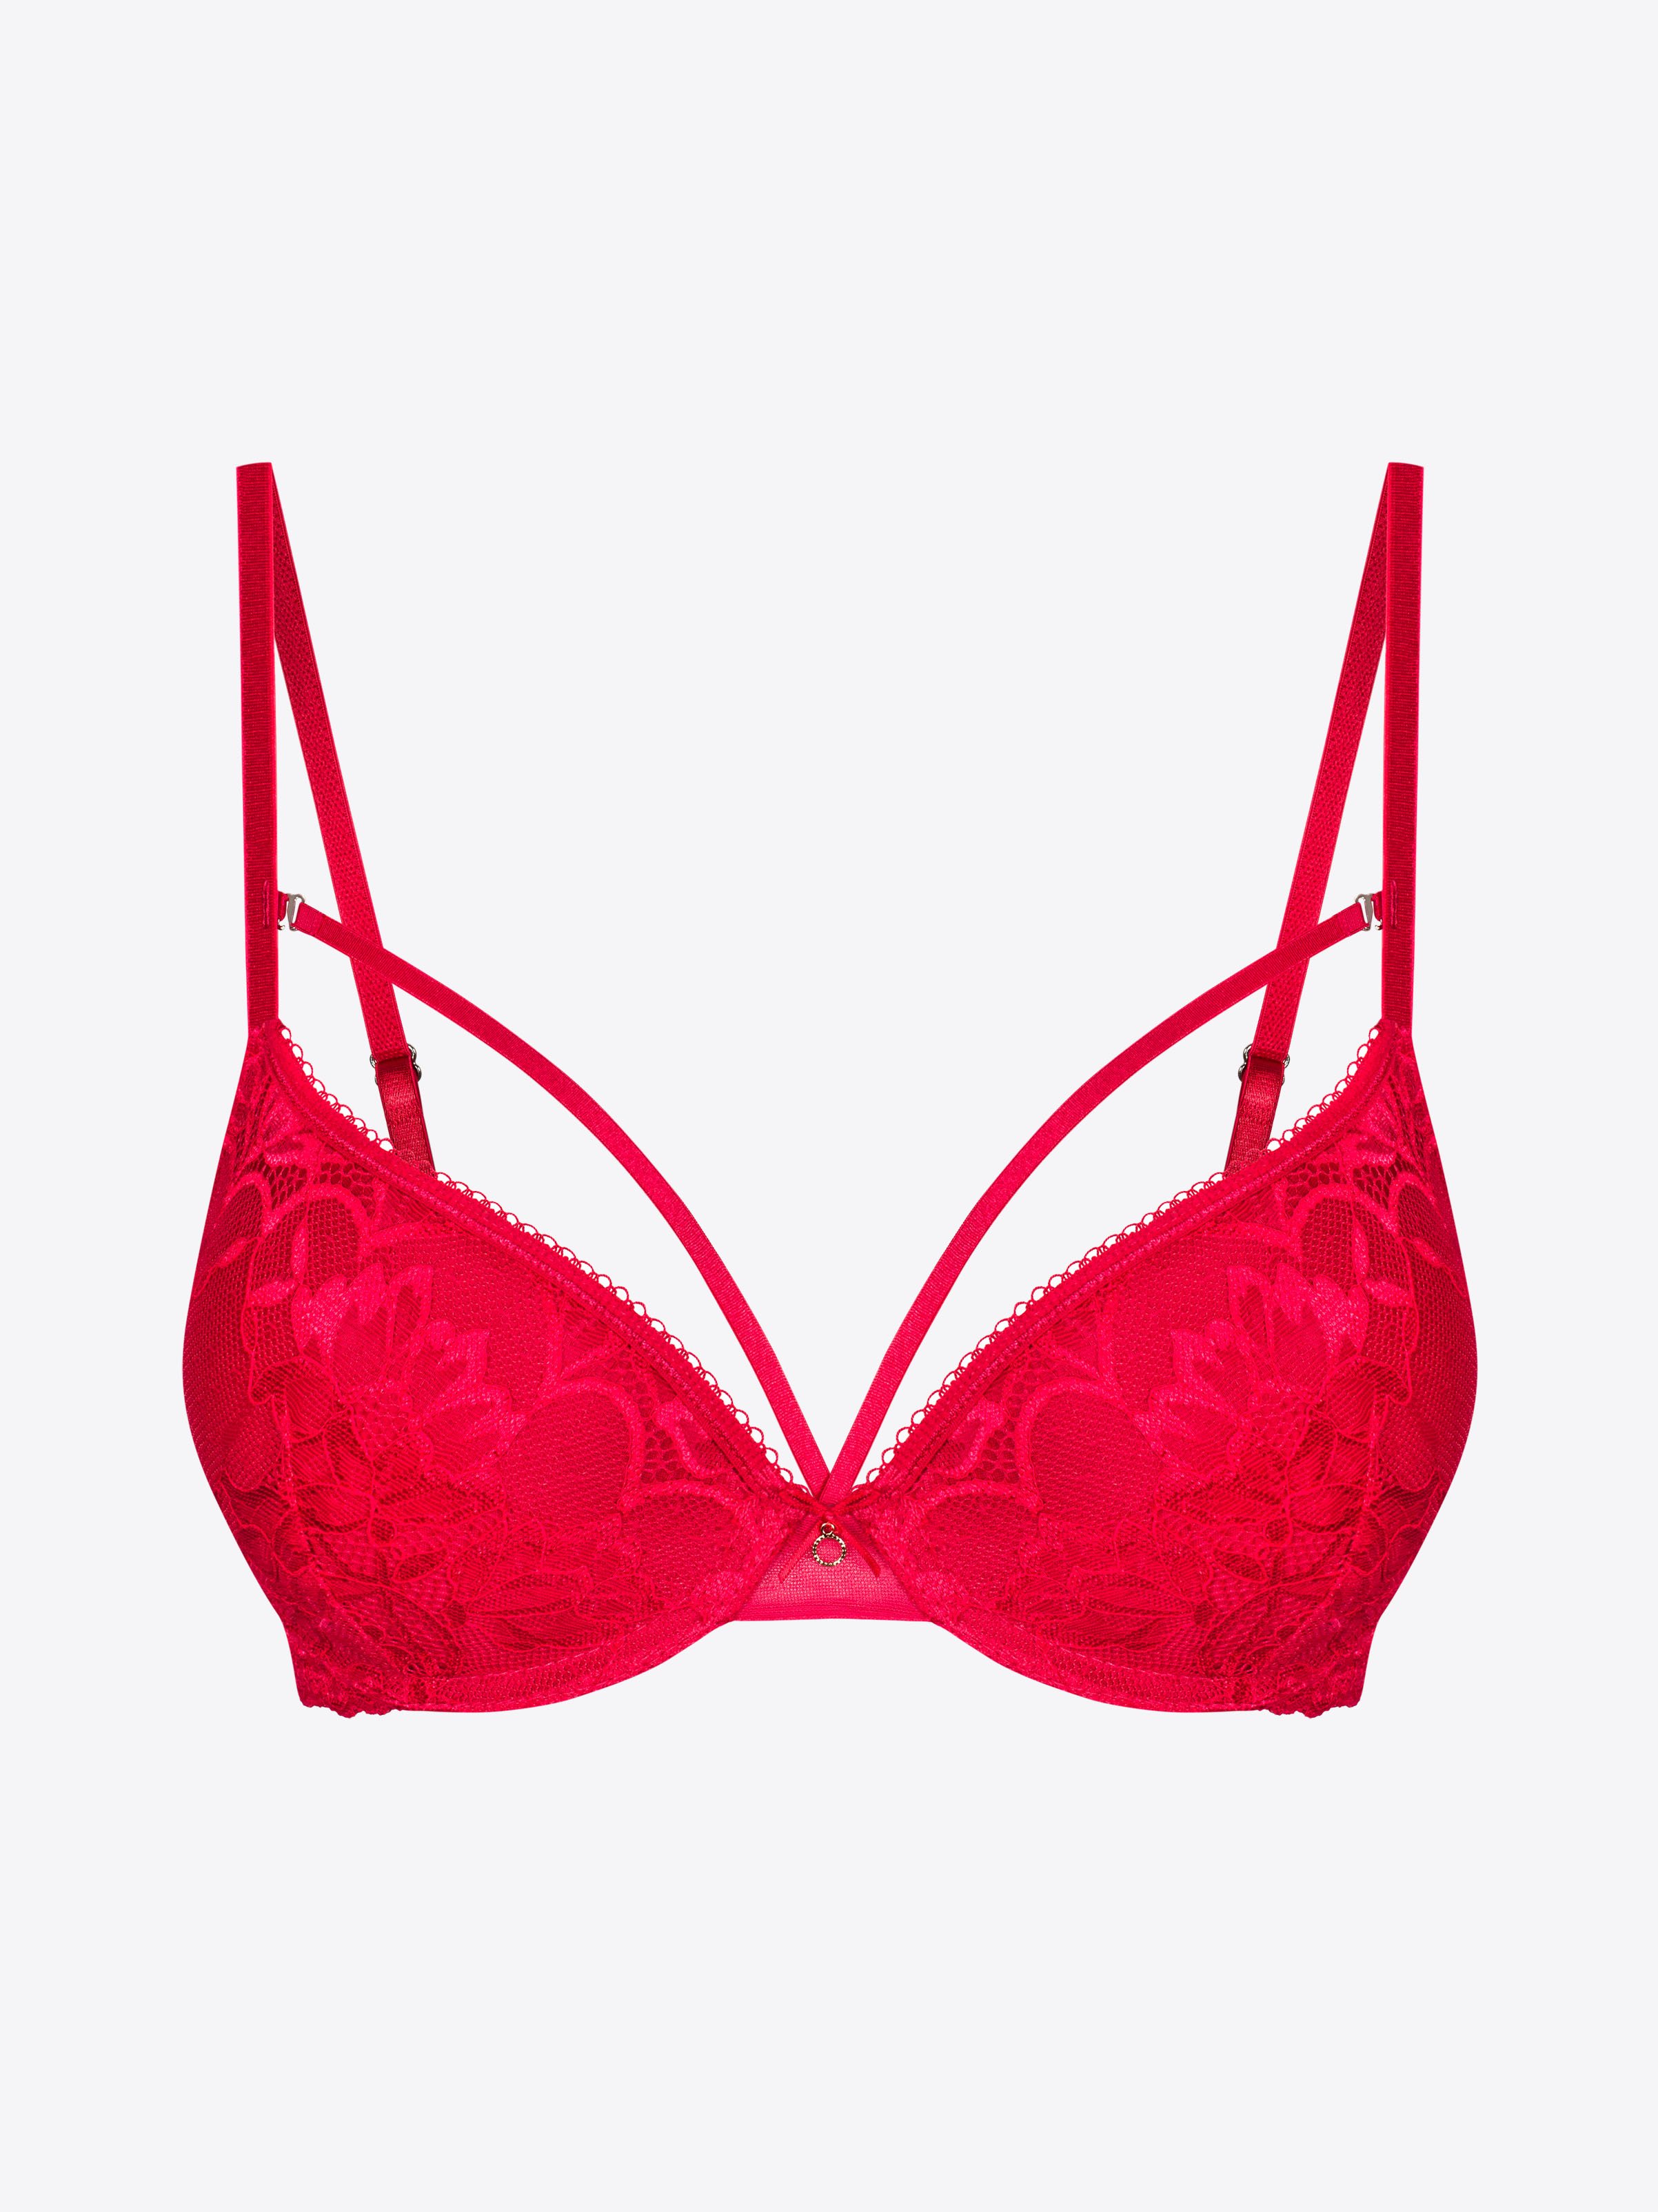 Em Rusciano - I was forced to go and buy new bras today. Please appreciate  that I have gone from a 10C to a 14D in a few short months and I'm